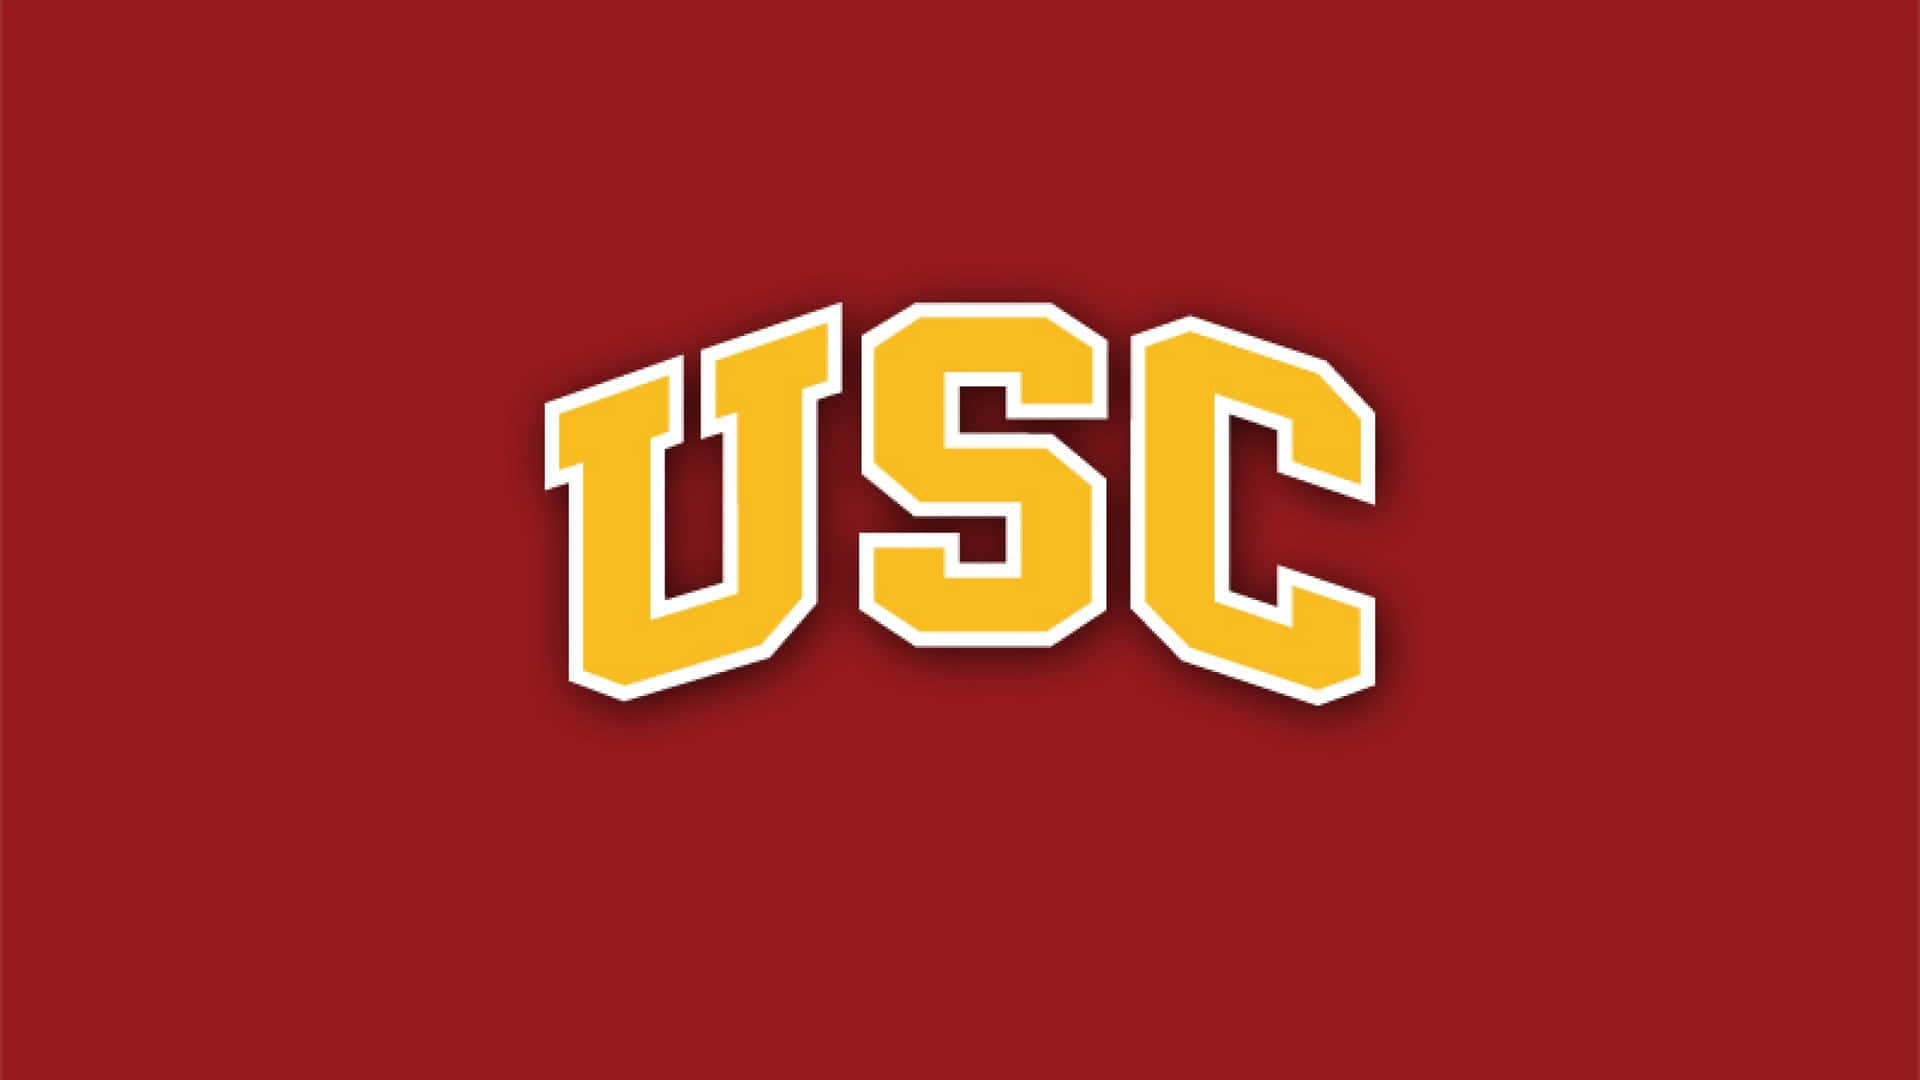 Usc Logo On A Red Background